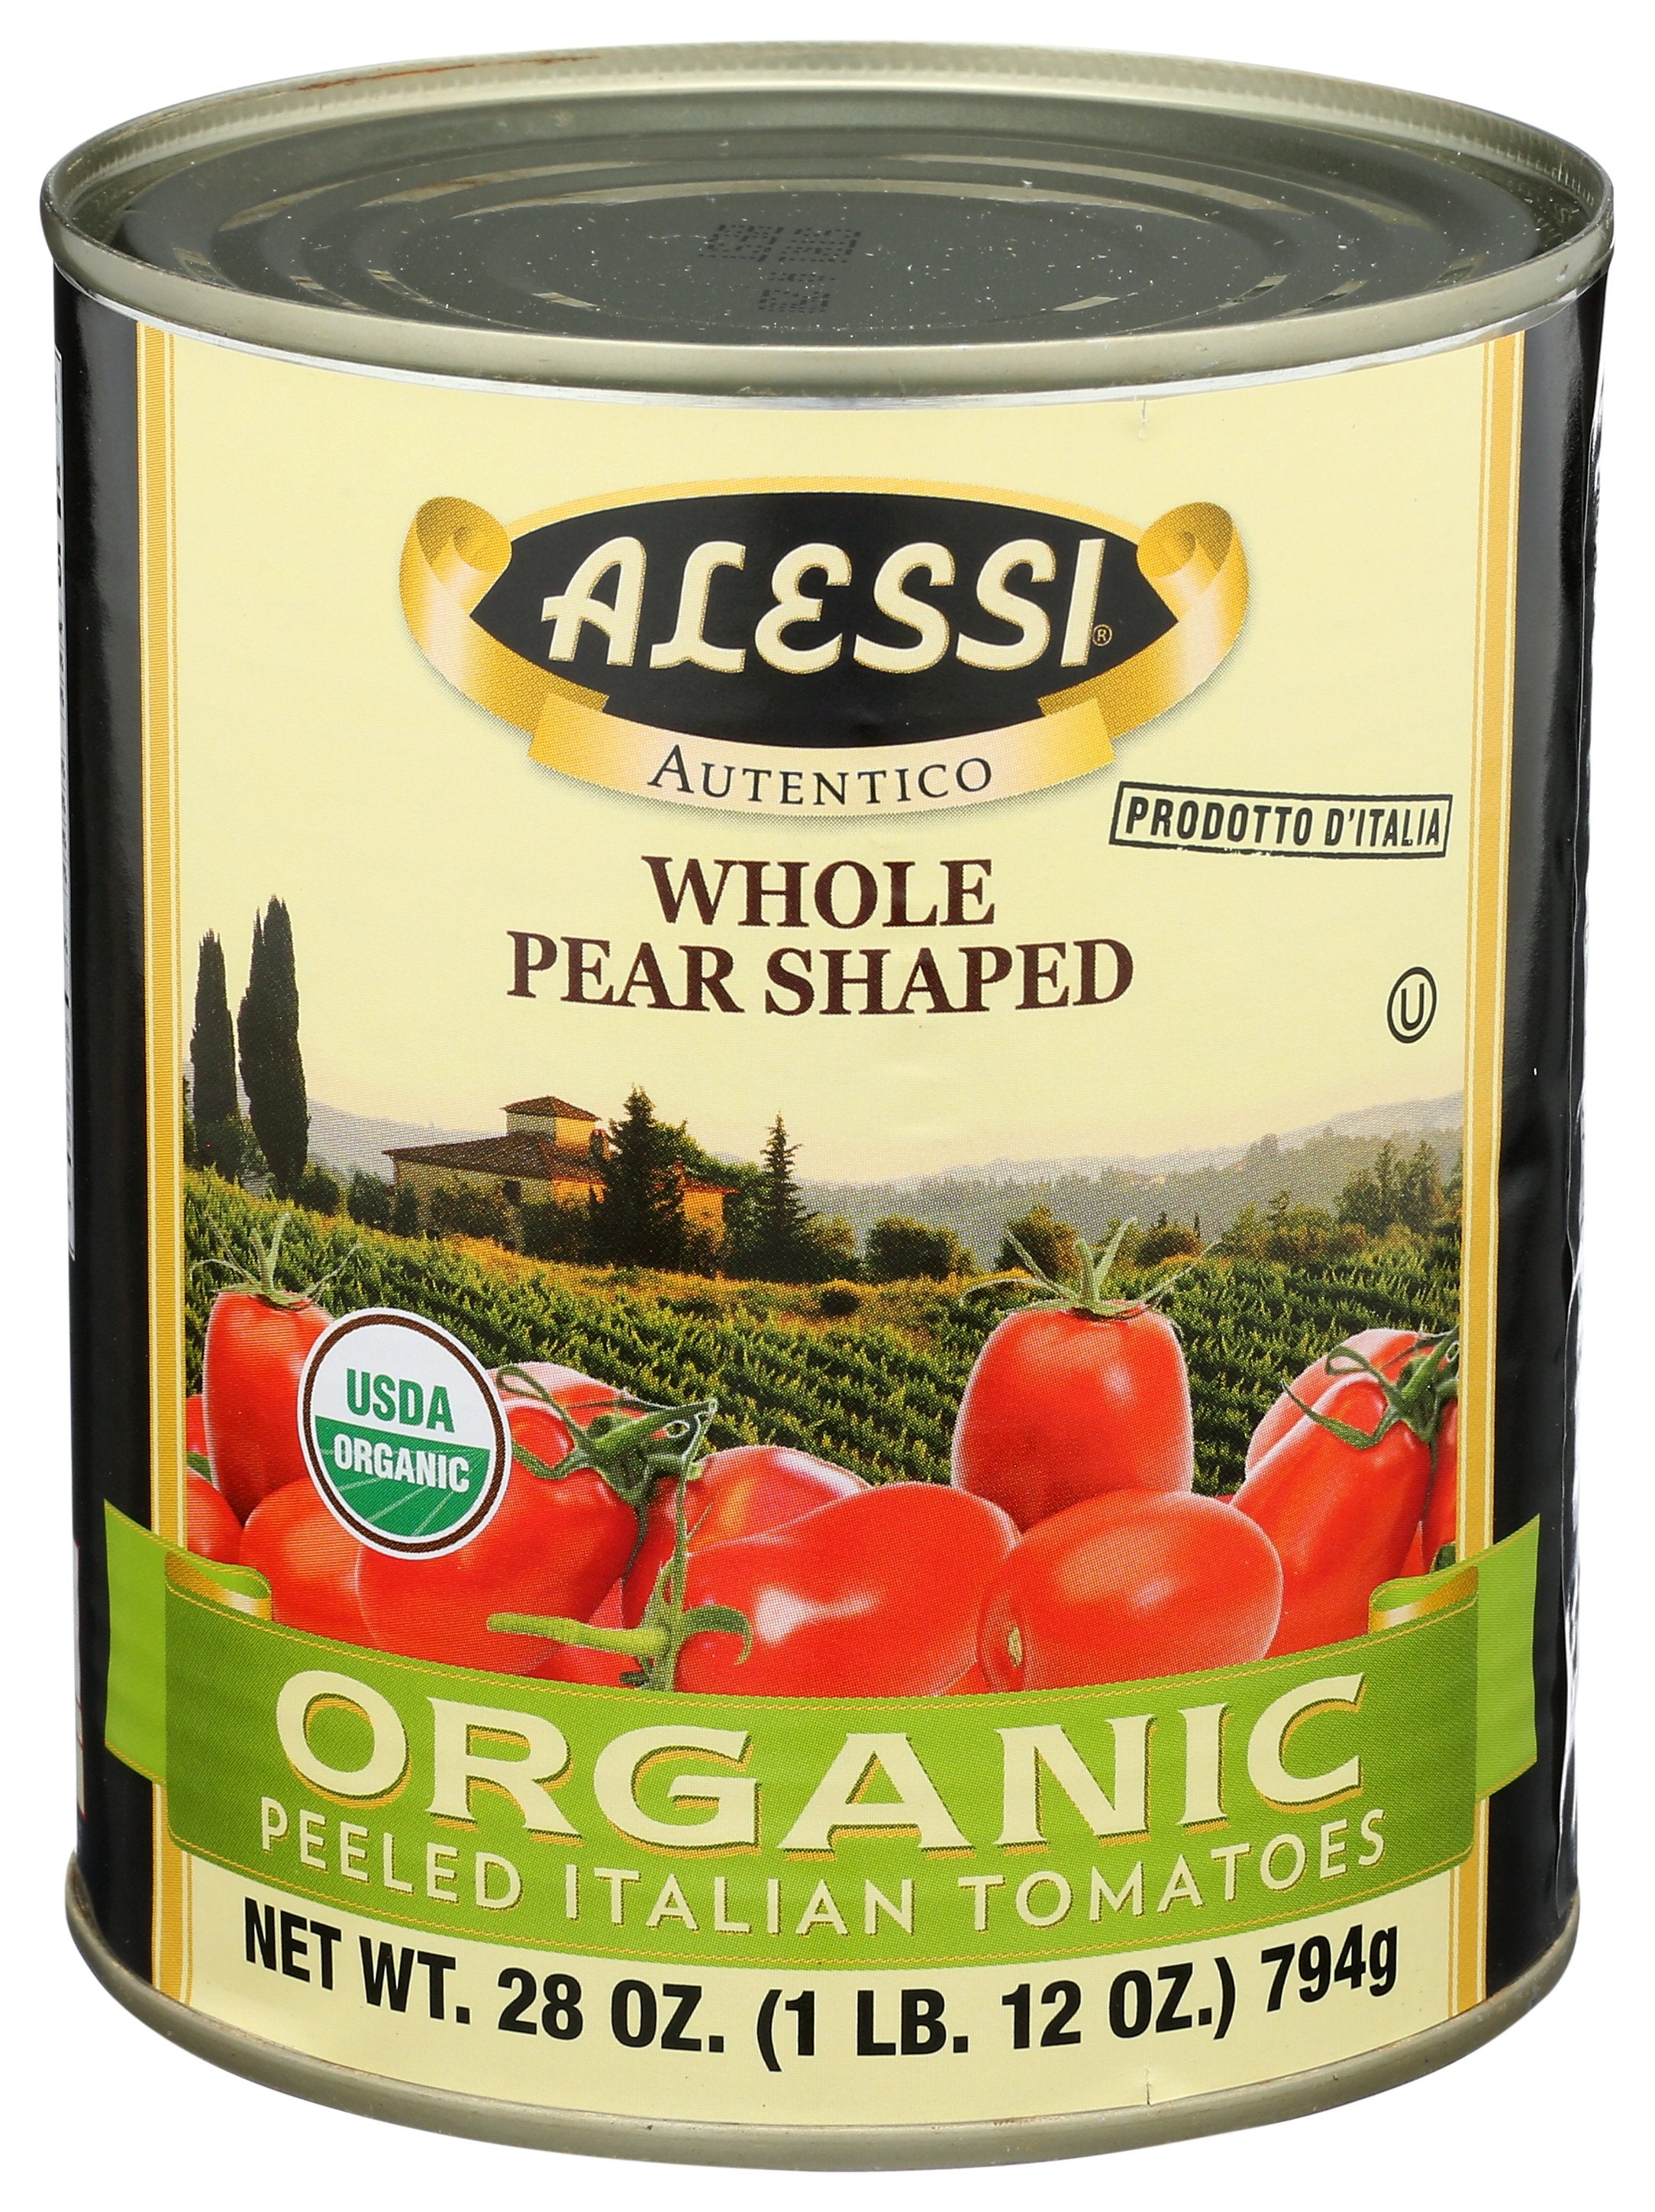 ALESSI TOMATO PELLED ORG - Case of 12